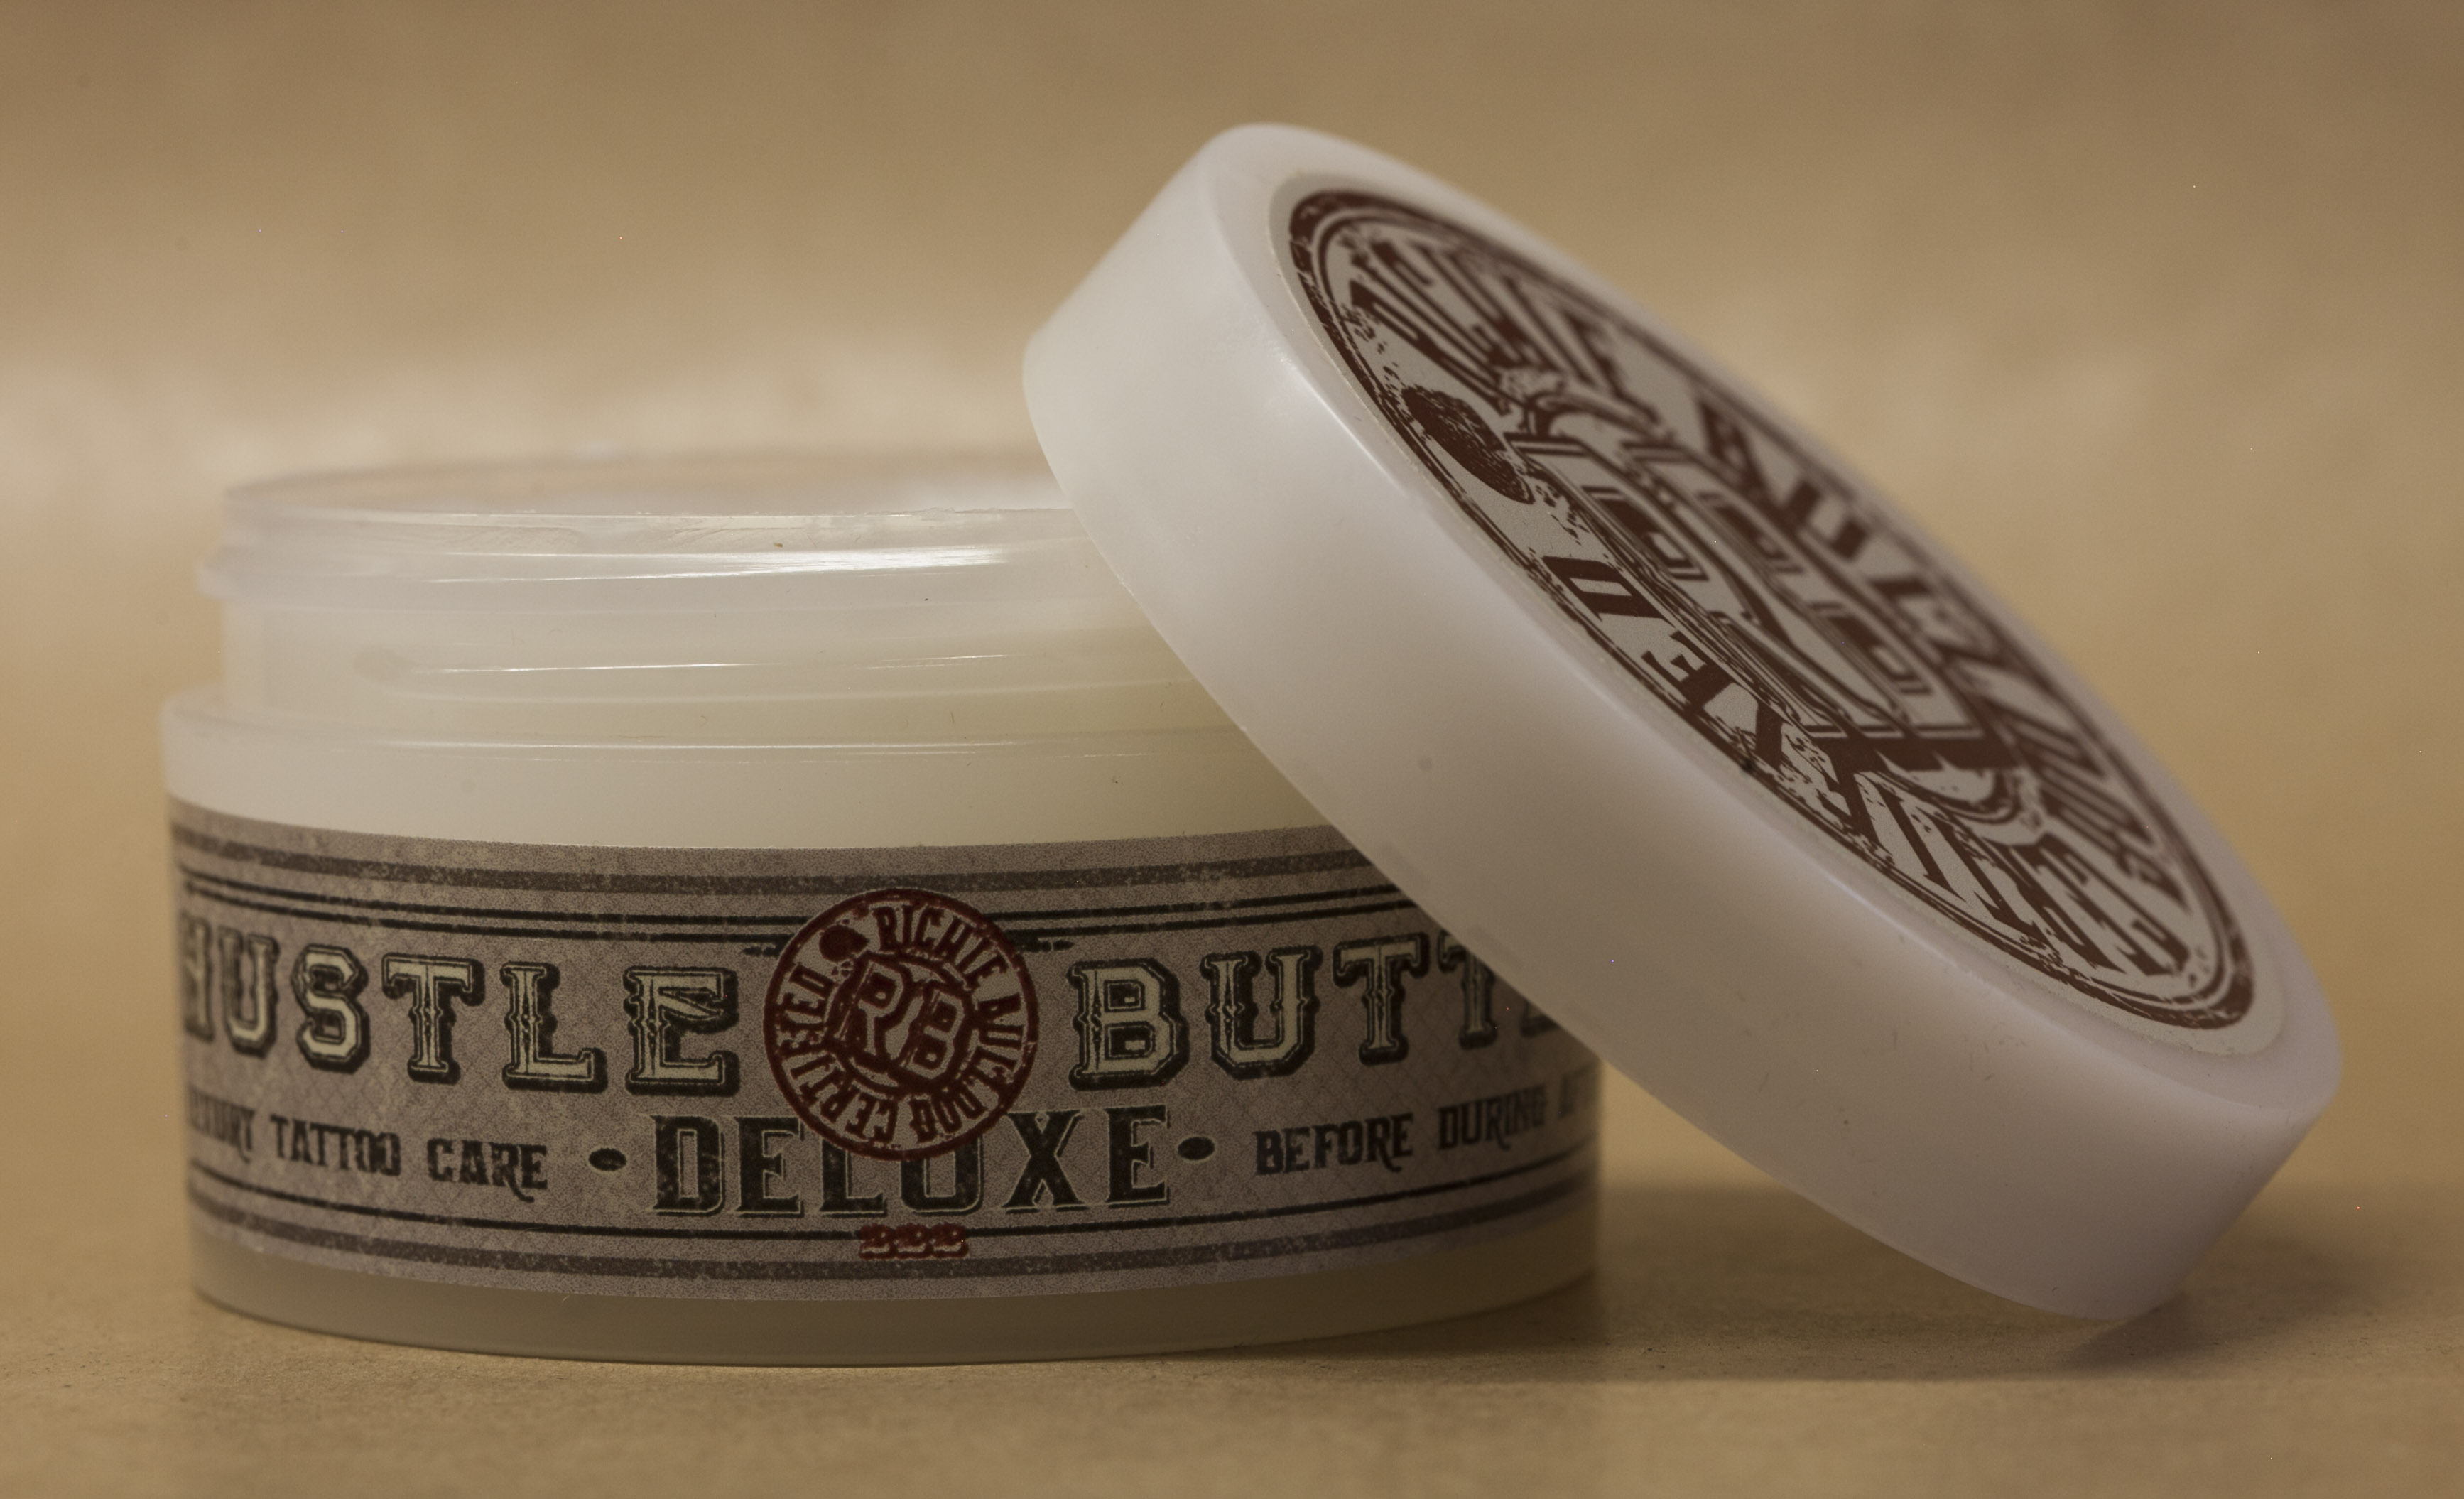 Hustle Butter Deluxe  Luxury Tattoo Care  30ml by Hustle Butter Deluxe   Shop Online for Beauty in Malaysia